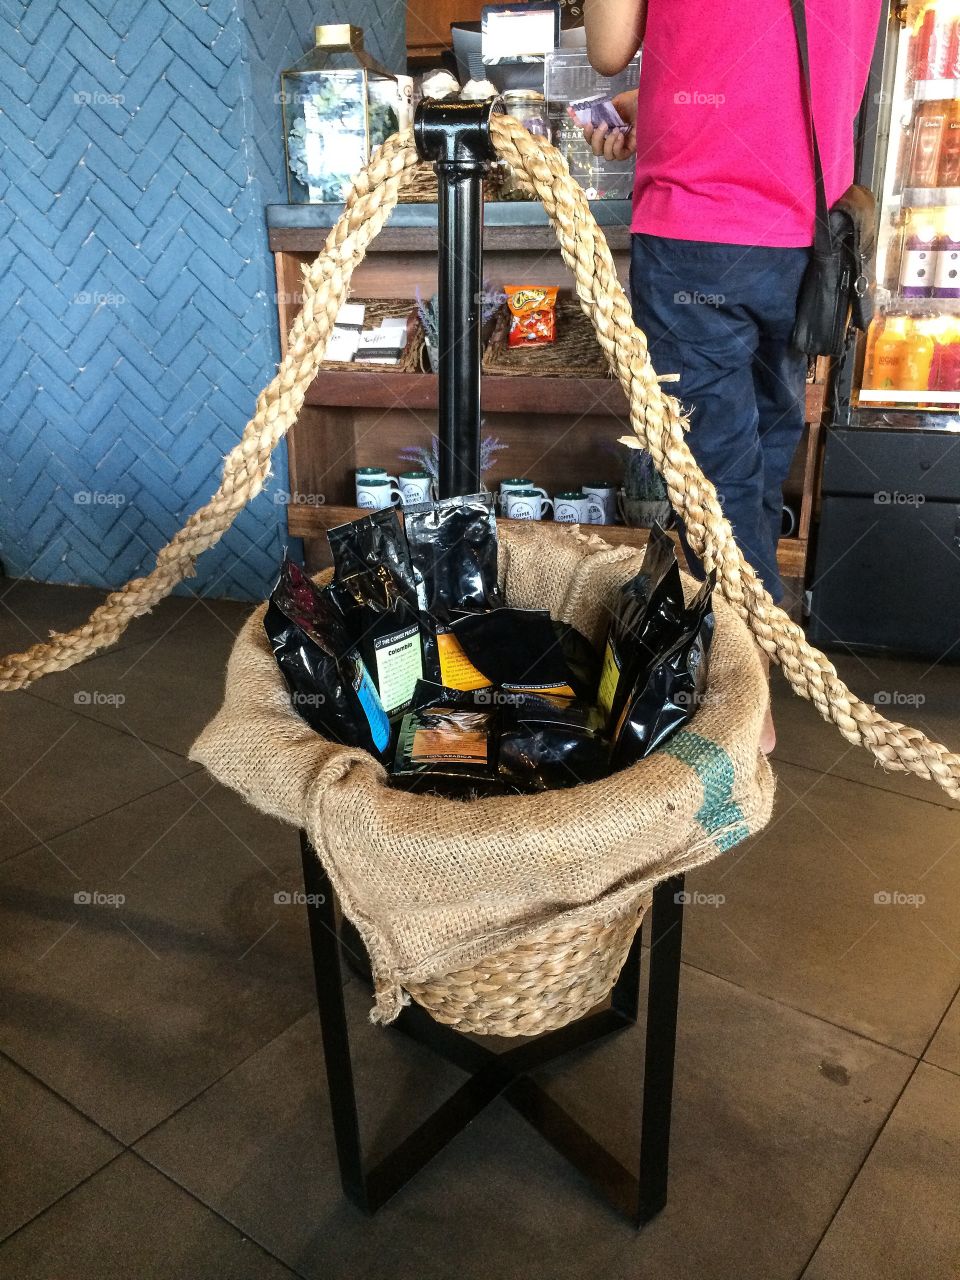 A basket of coffee